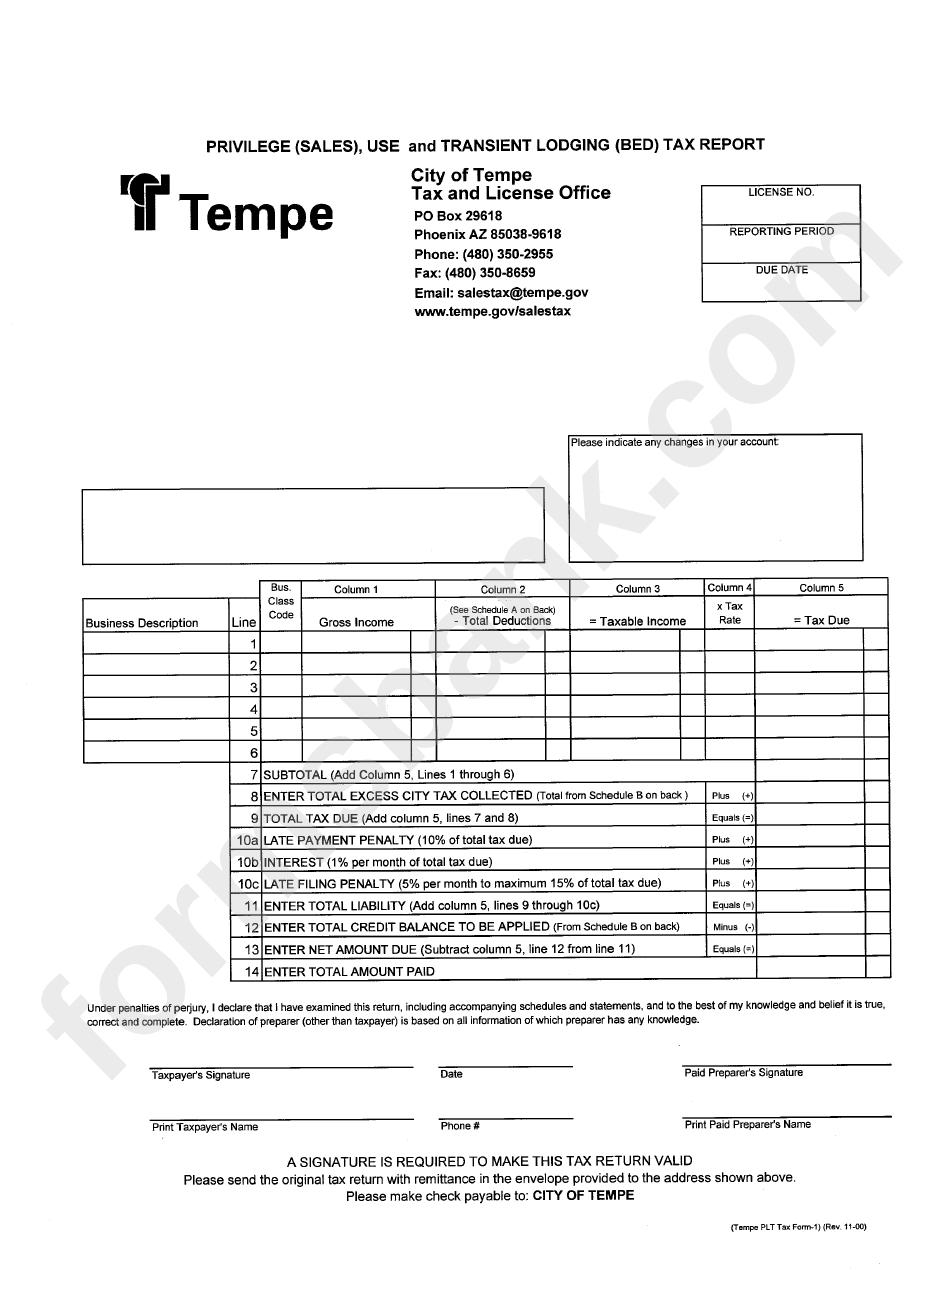 Privilege (Sales), Use And Transient Lodging (Bed) Tax Report Form - City Of Tempe